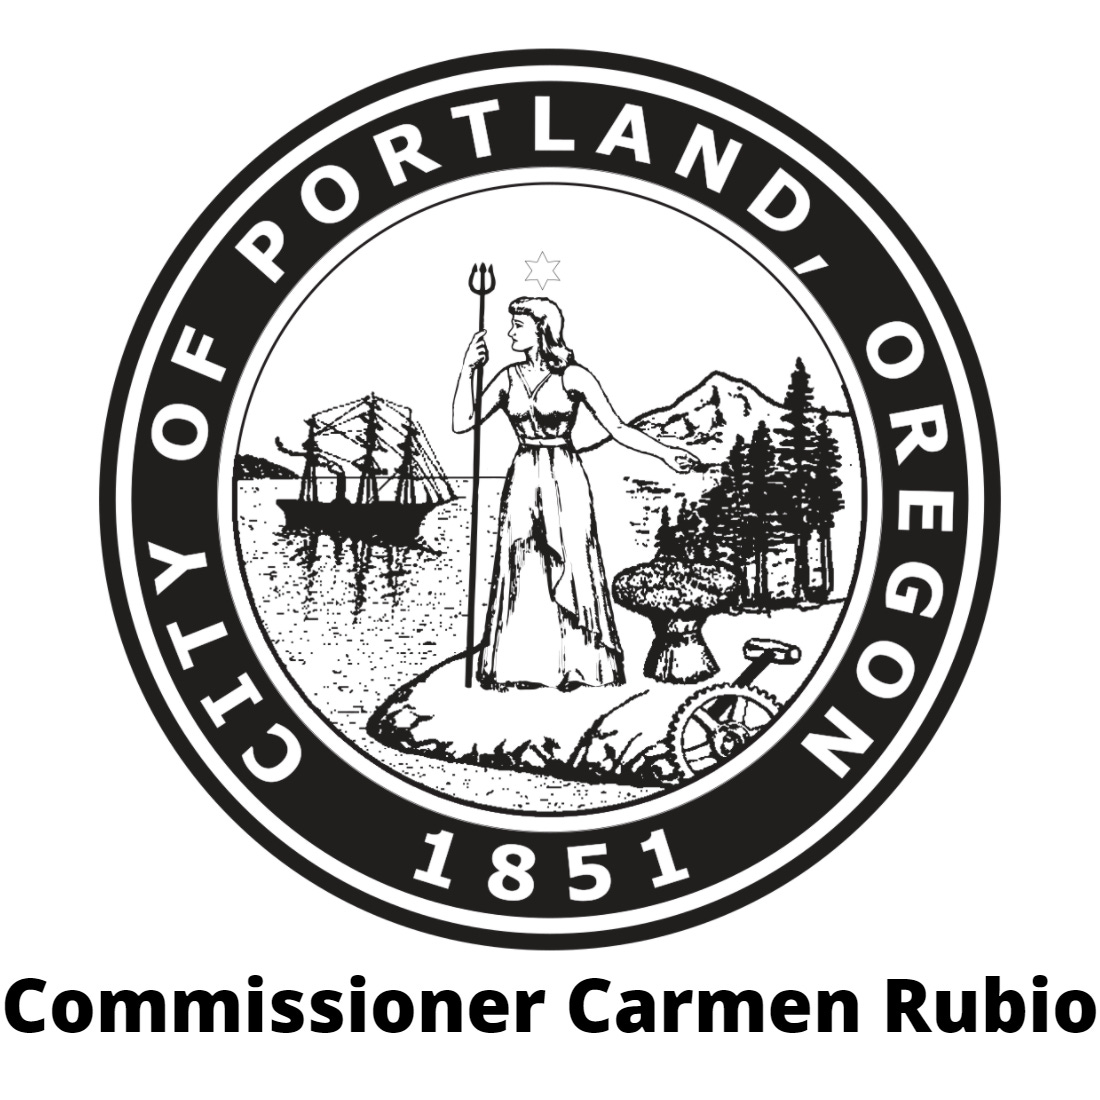 Portland City Seal with the words "Commissioner Carmen Rubio"